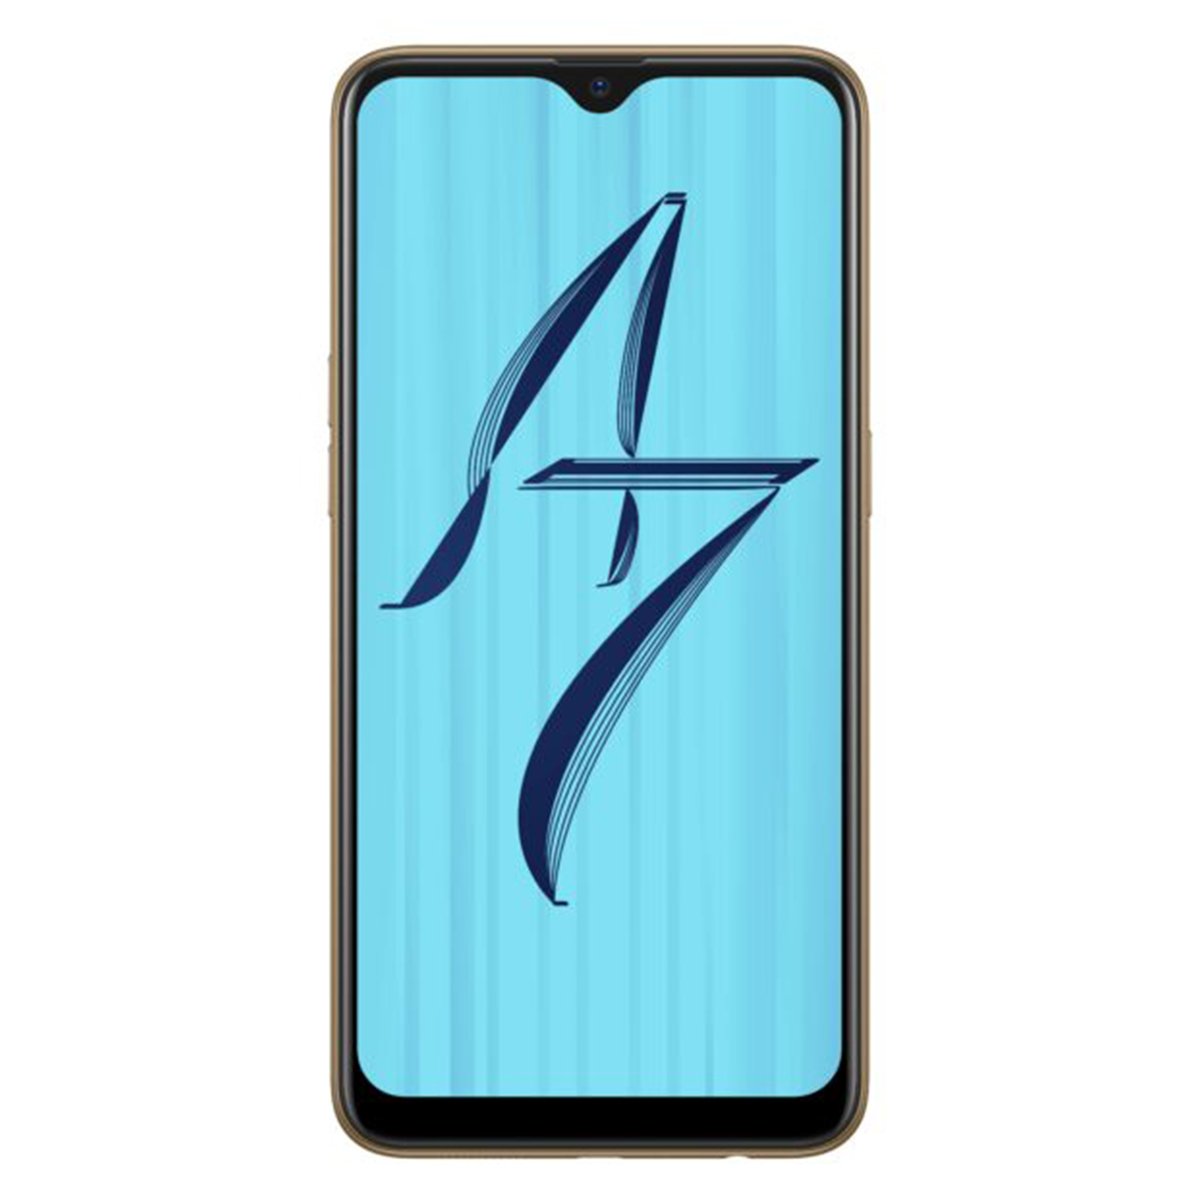 Oppo A7 64GB Dazzling Gold